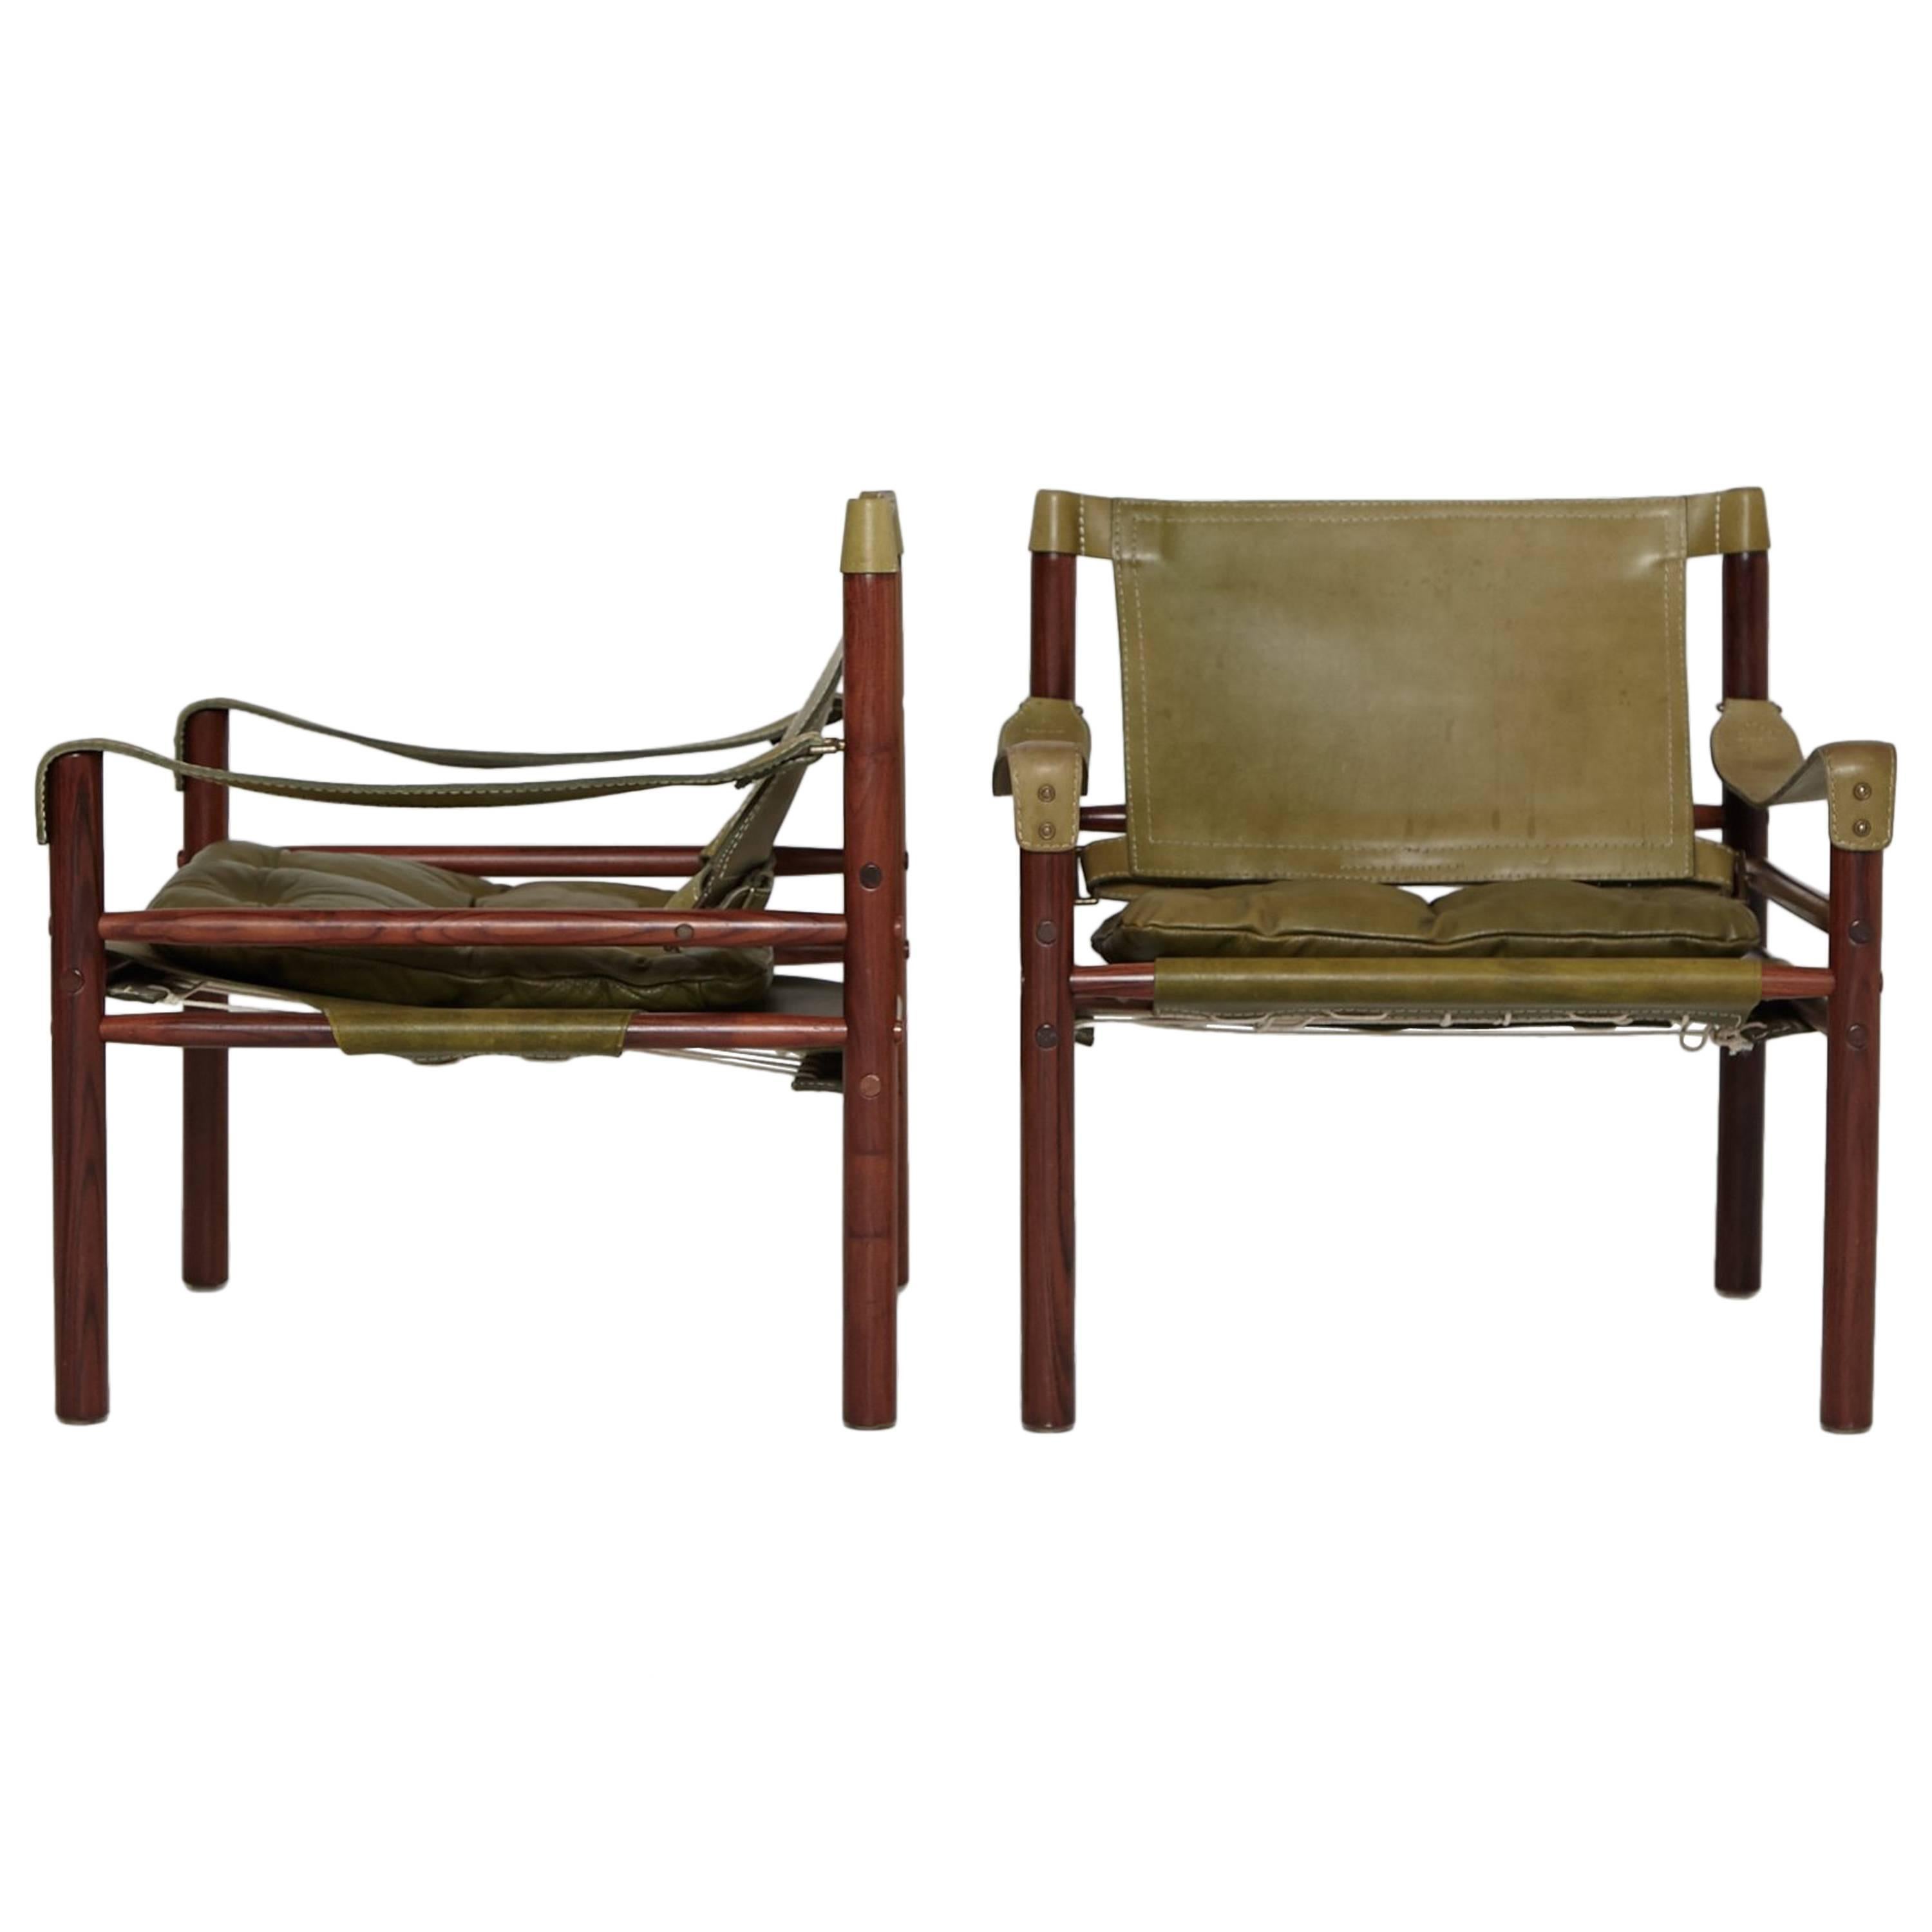 Pair of Green Leather Arne Norell 'Sirocco' Safari Chairs, Sweden, 1960s-1970s